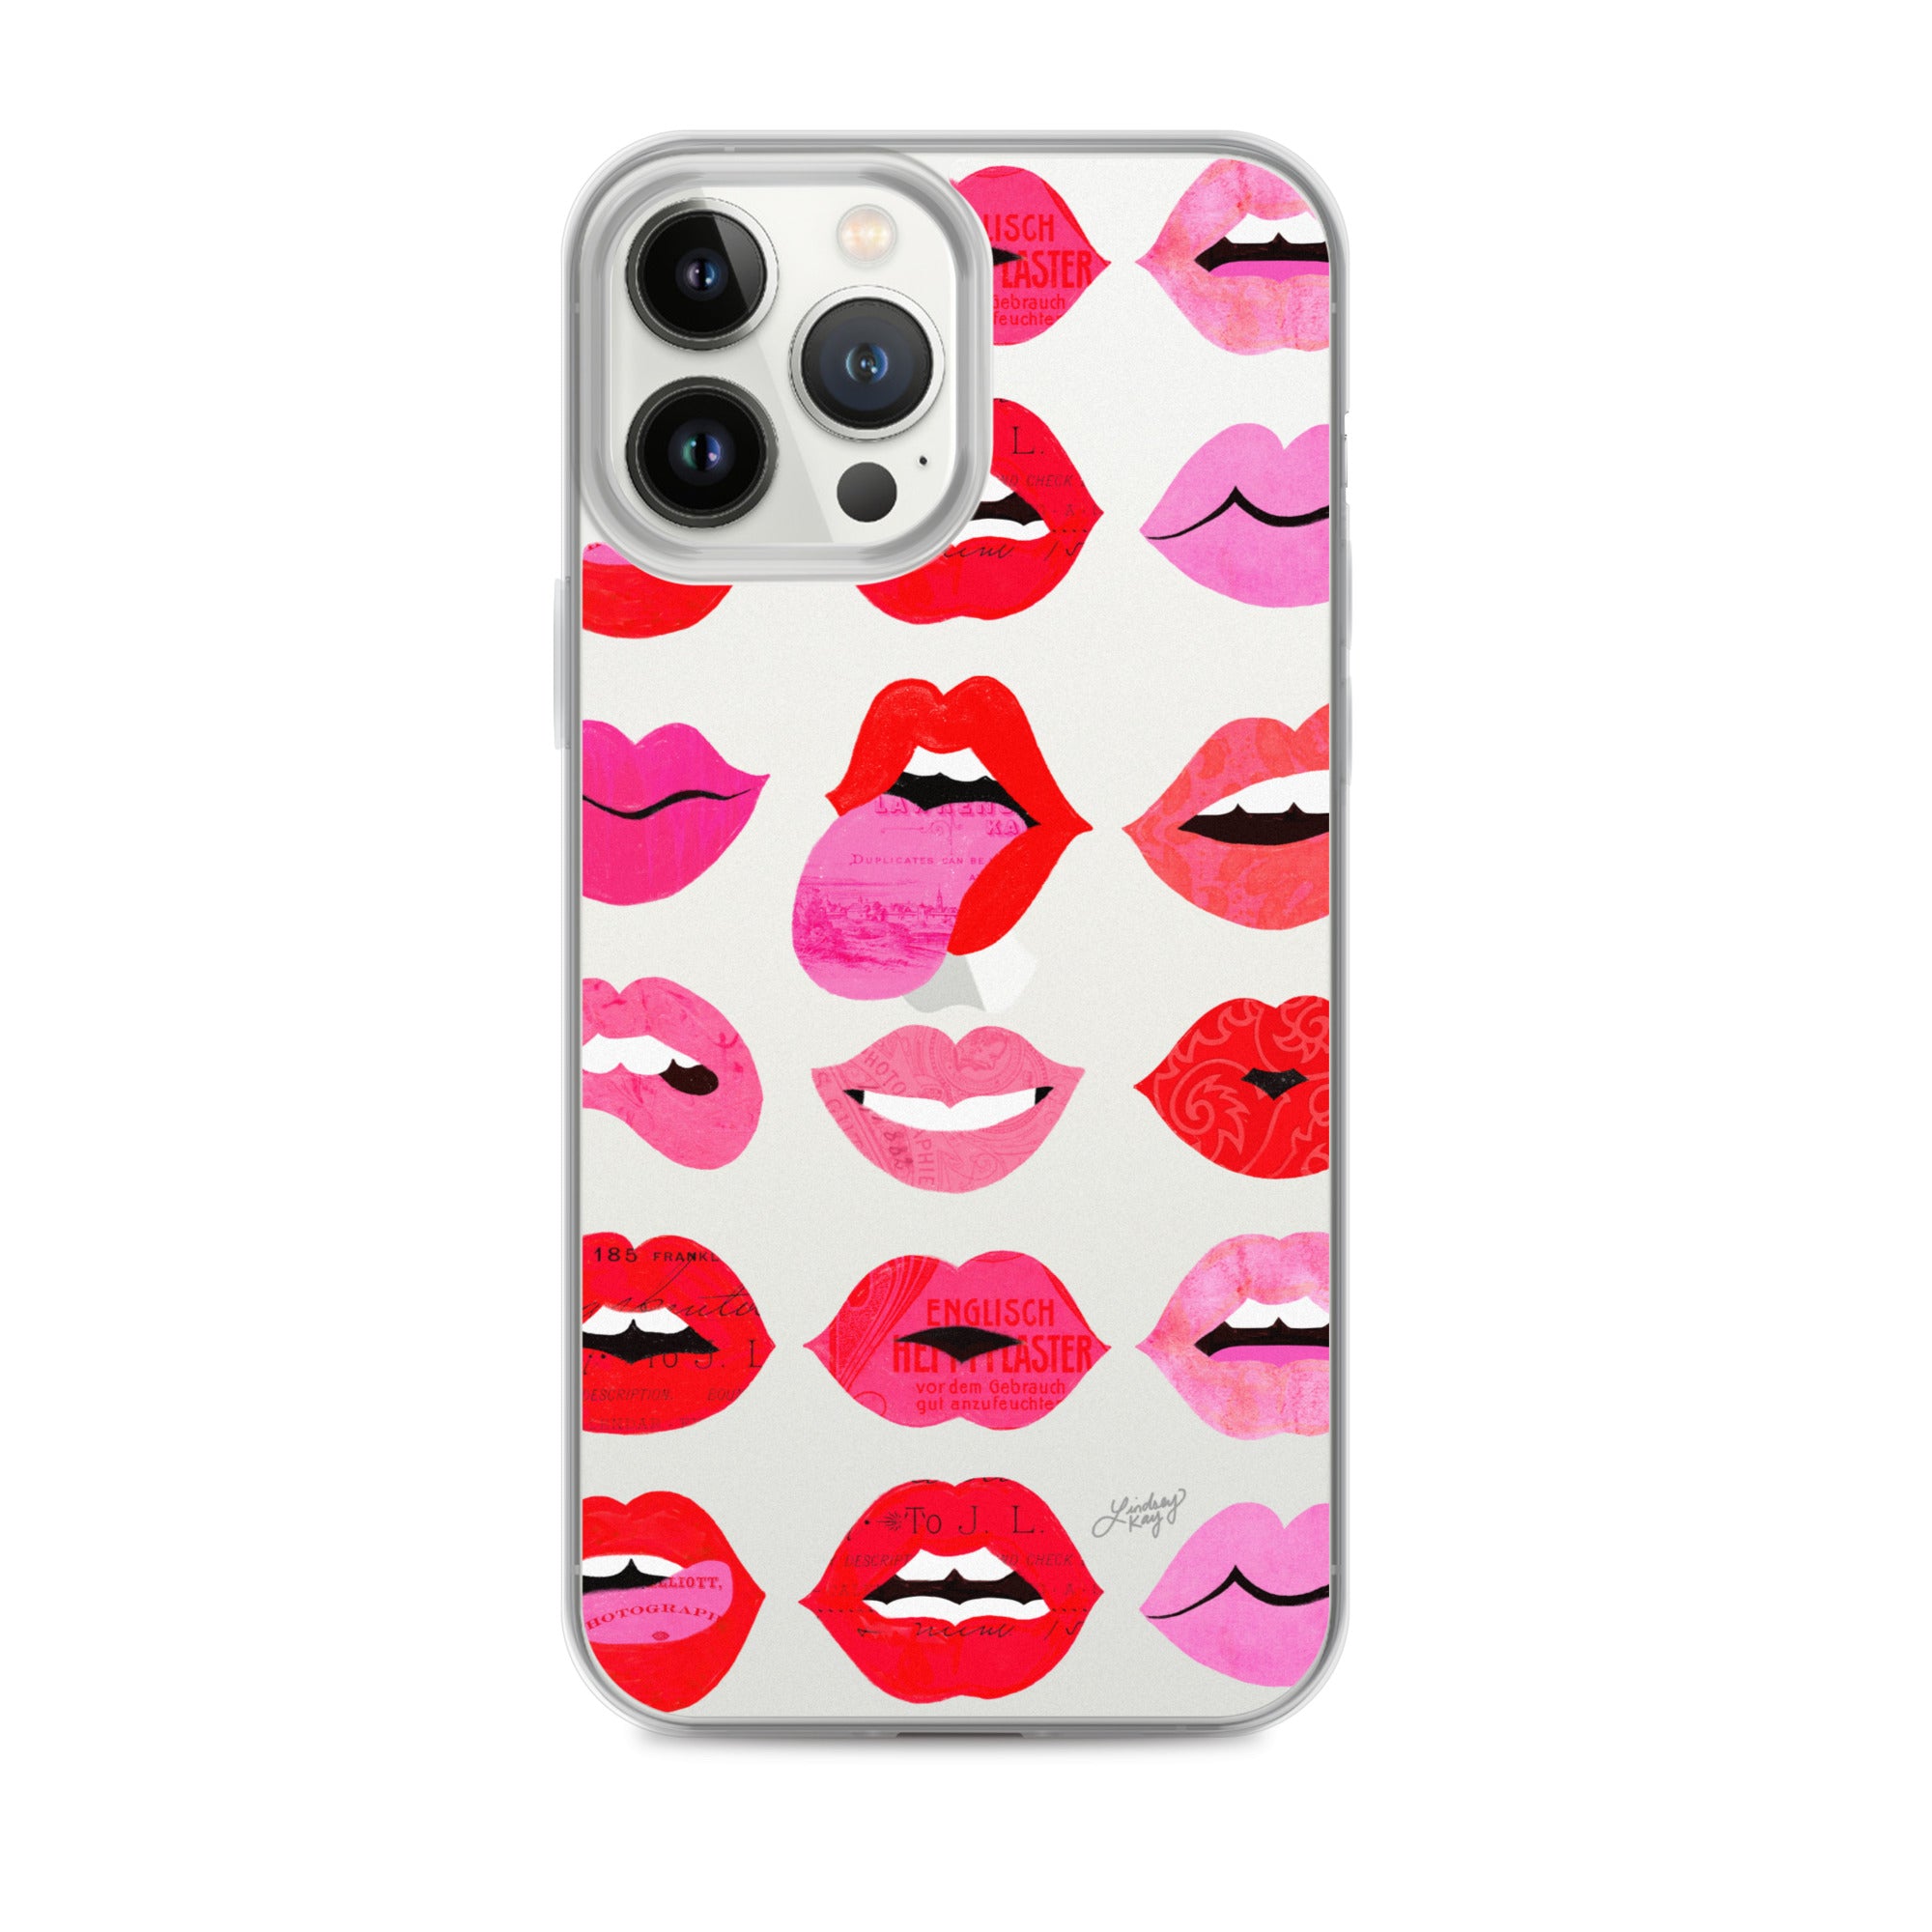 lips of love iphone case clear case red pink phone cover lindsey kay collective